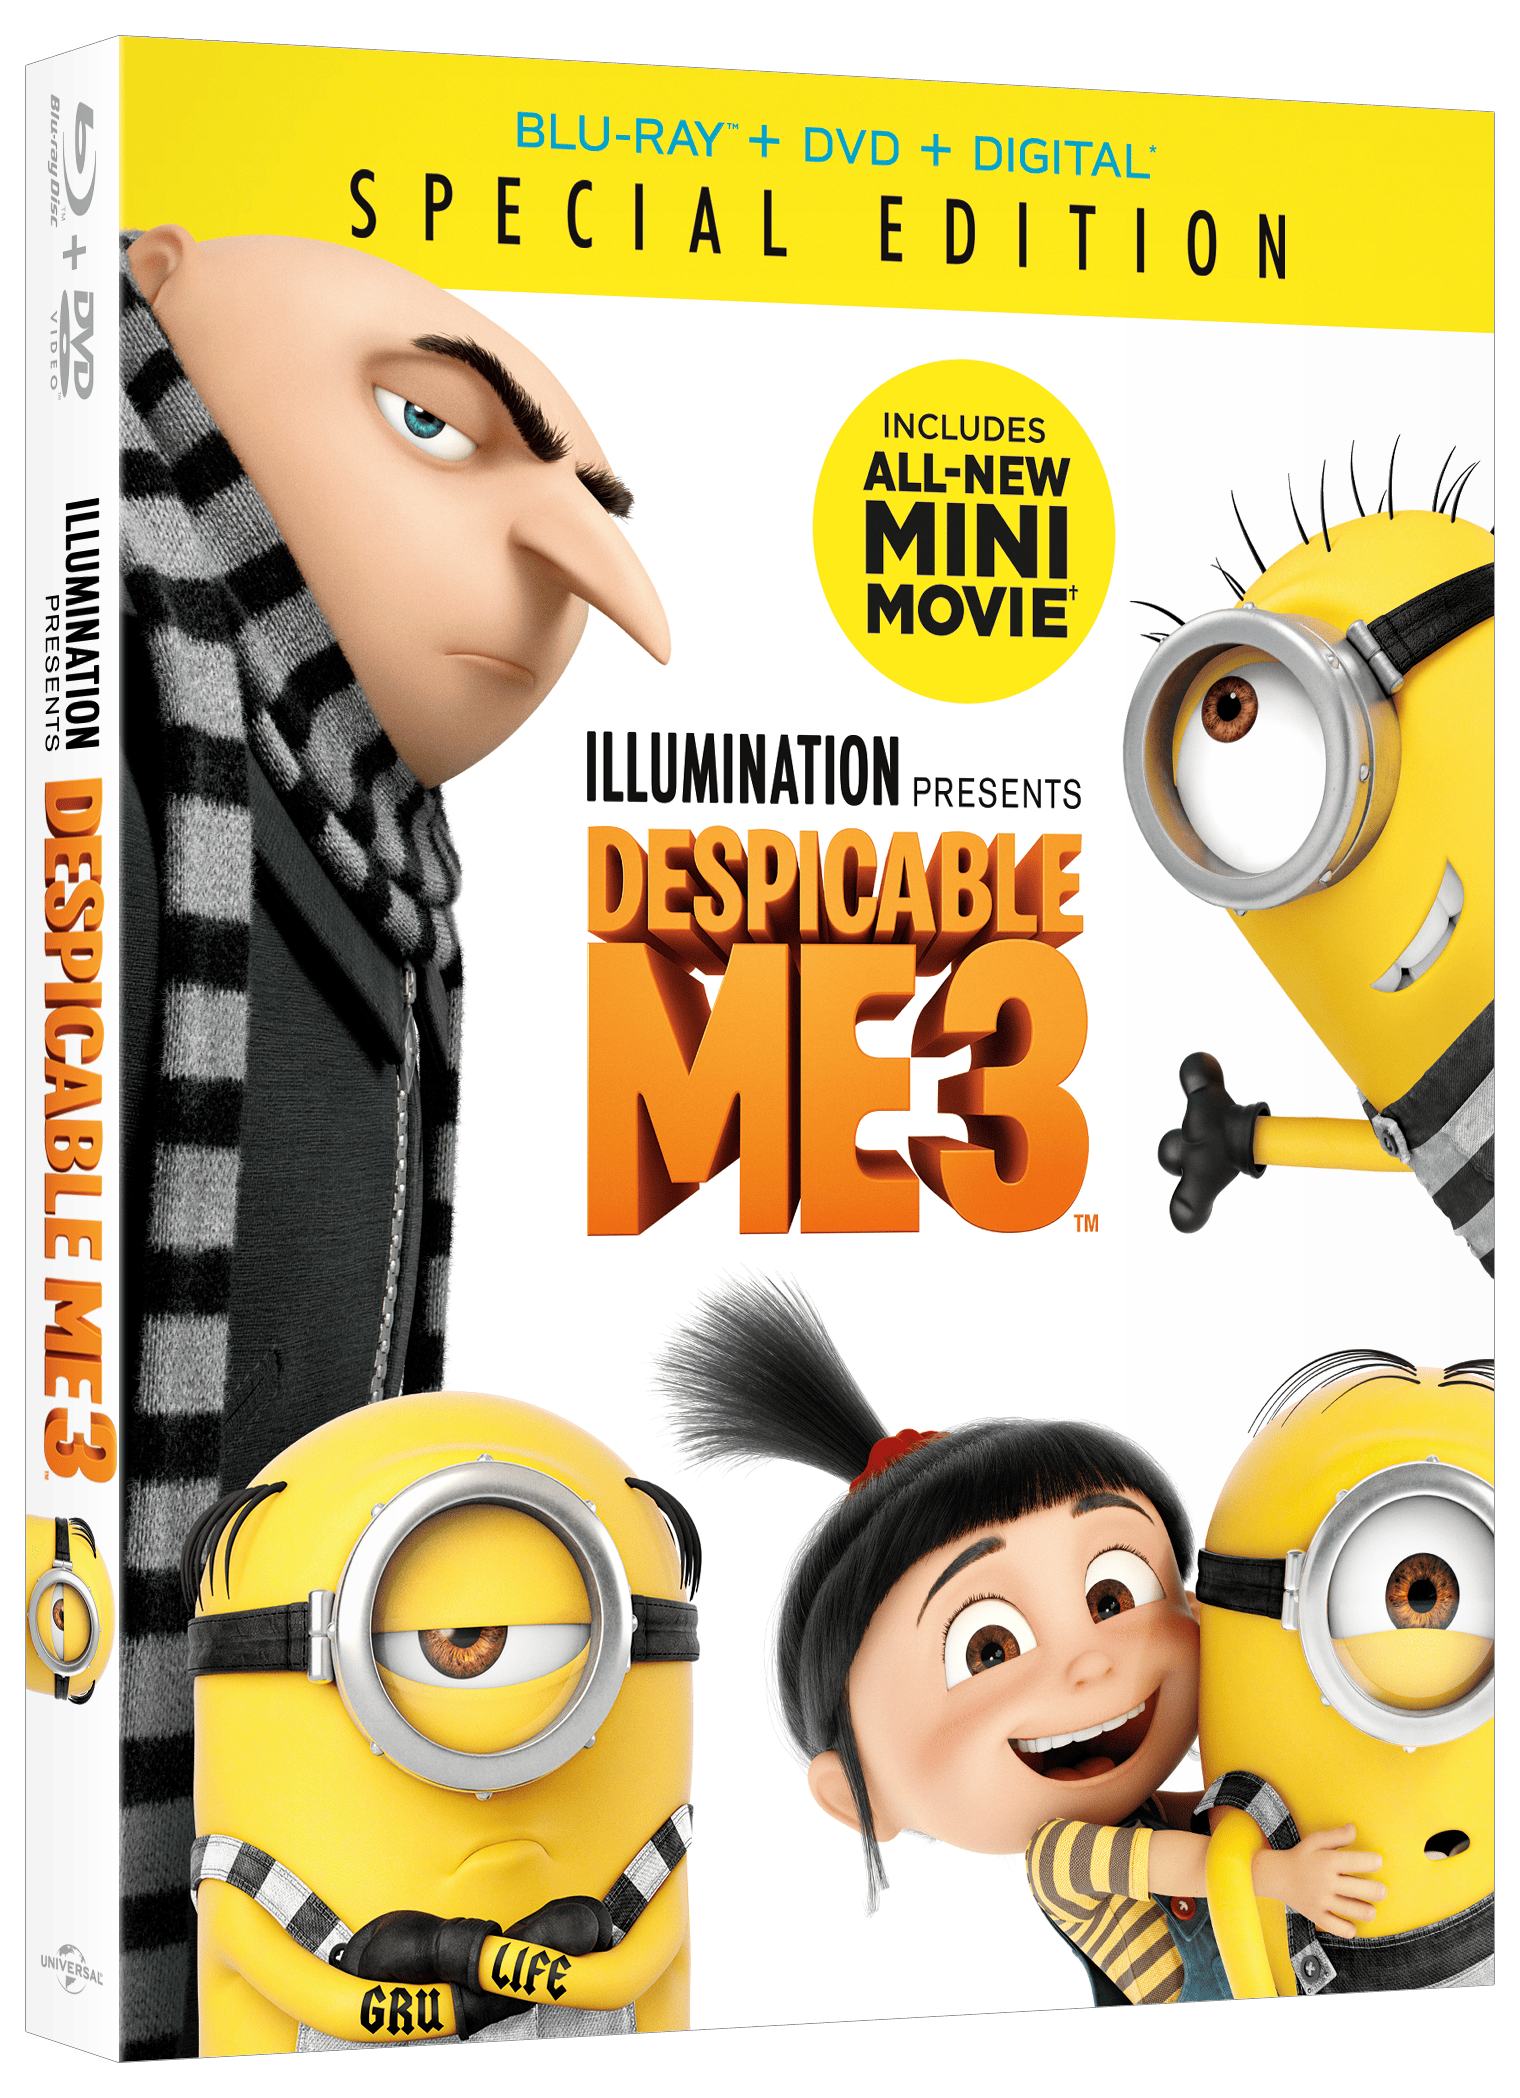 Despicable Me 3 Special Edition is available on Digital November 21st. Also, available on Blu-ray and DVD on December 5th.